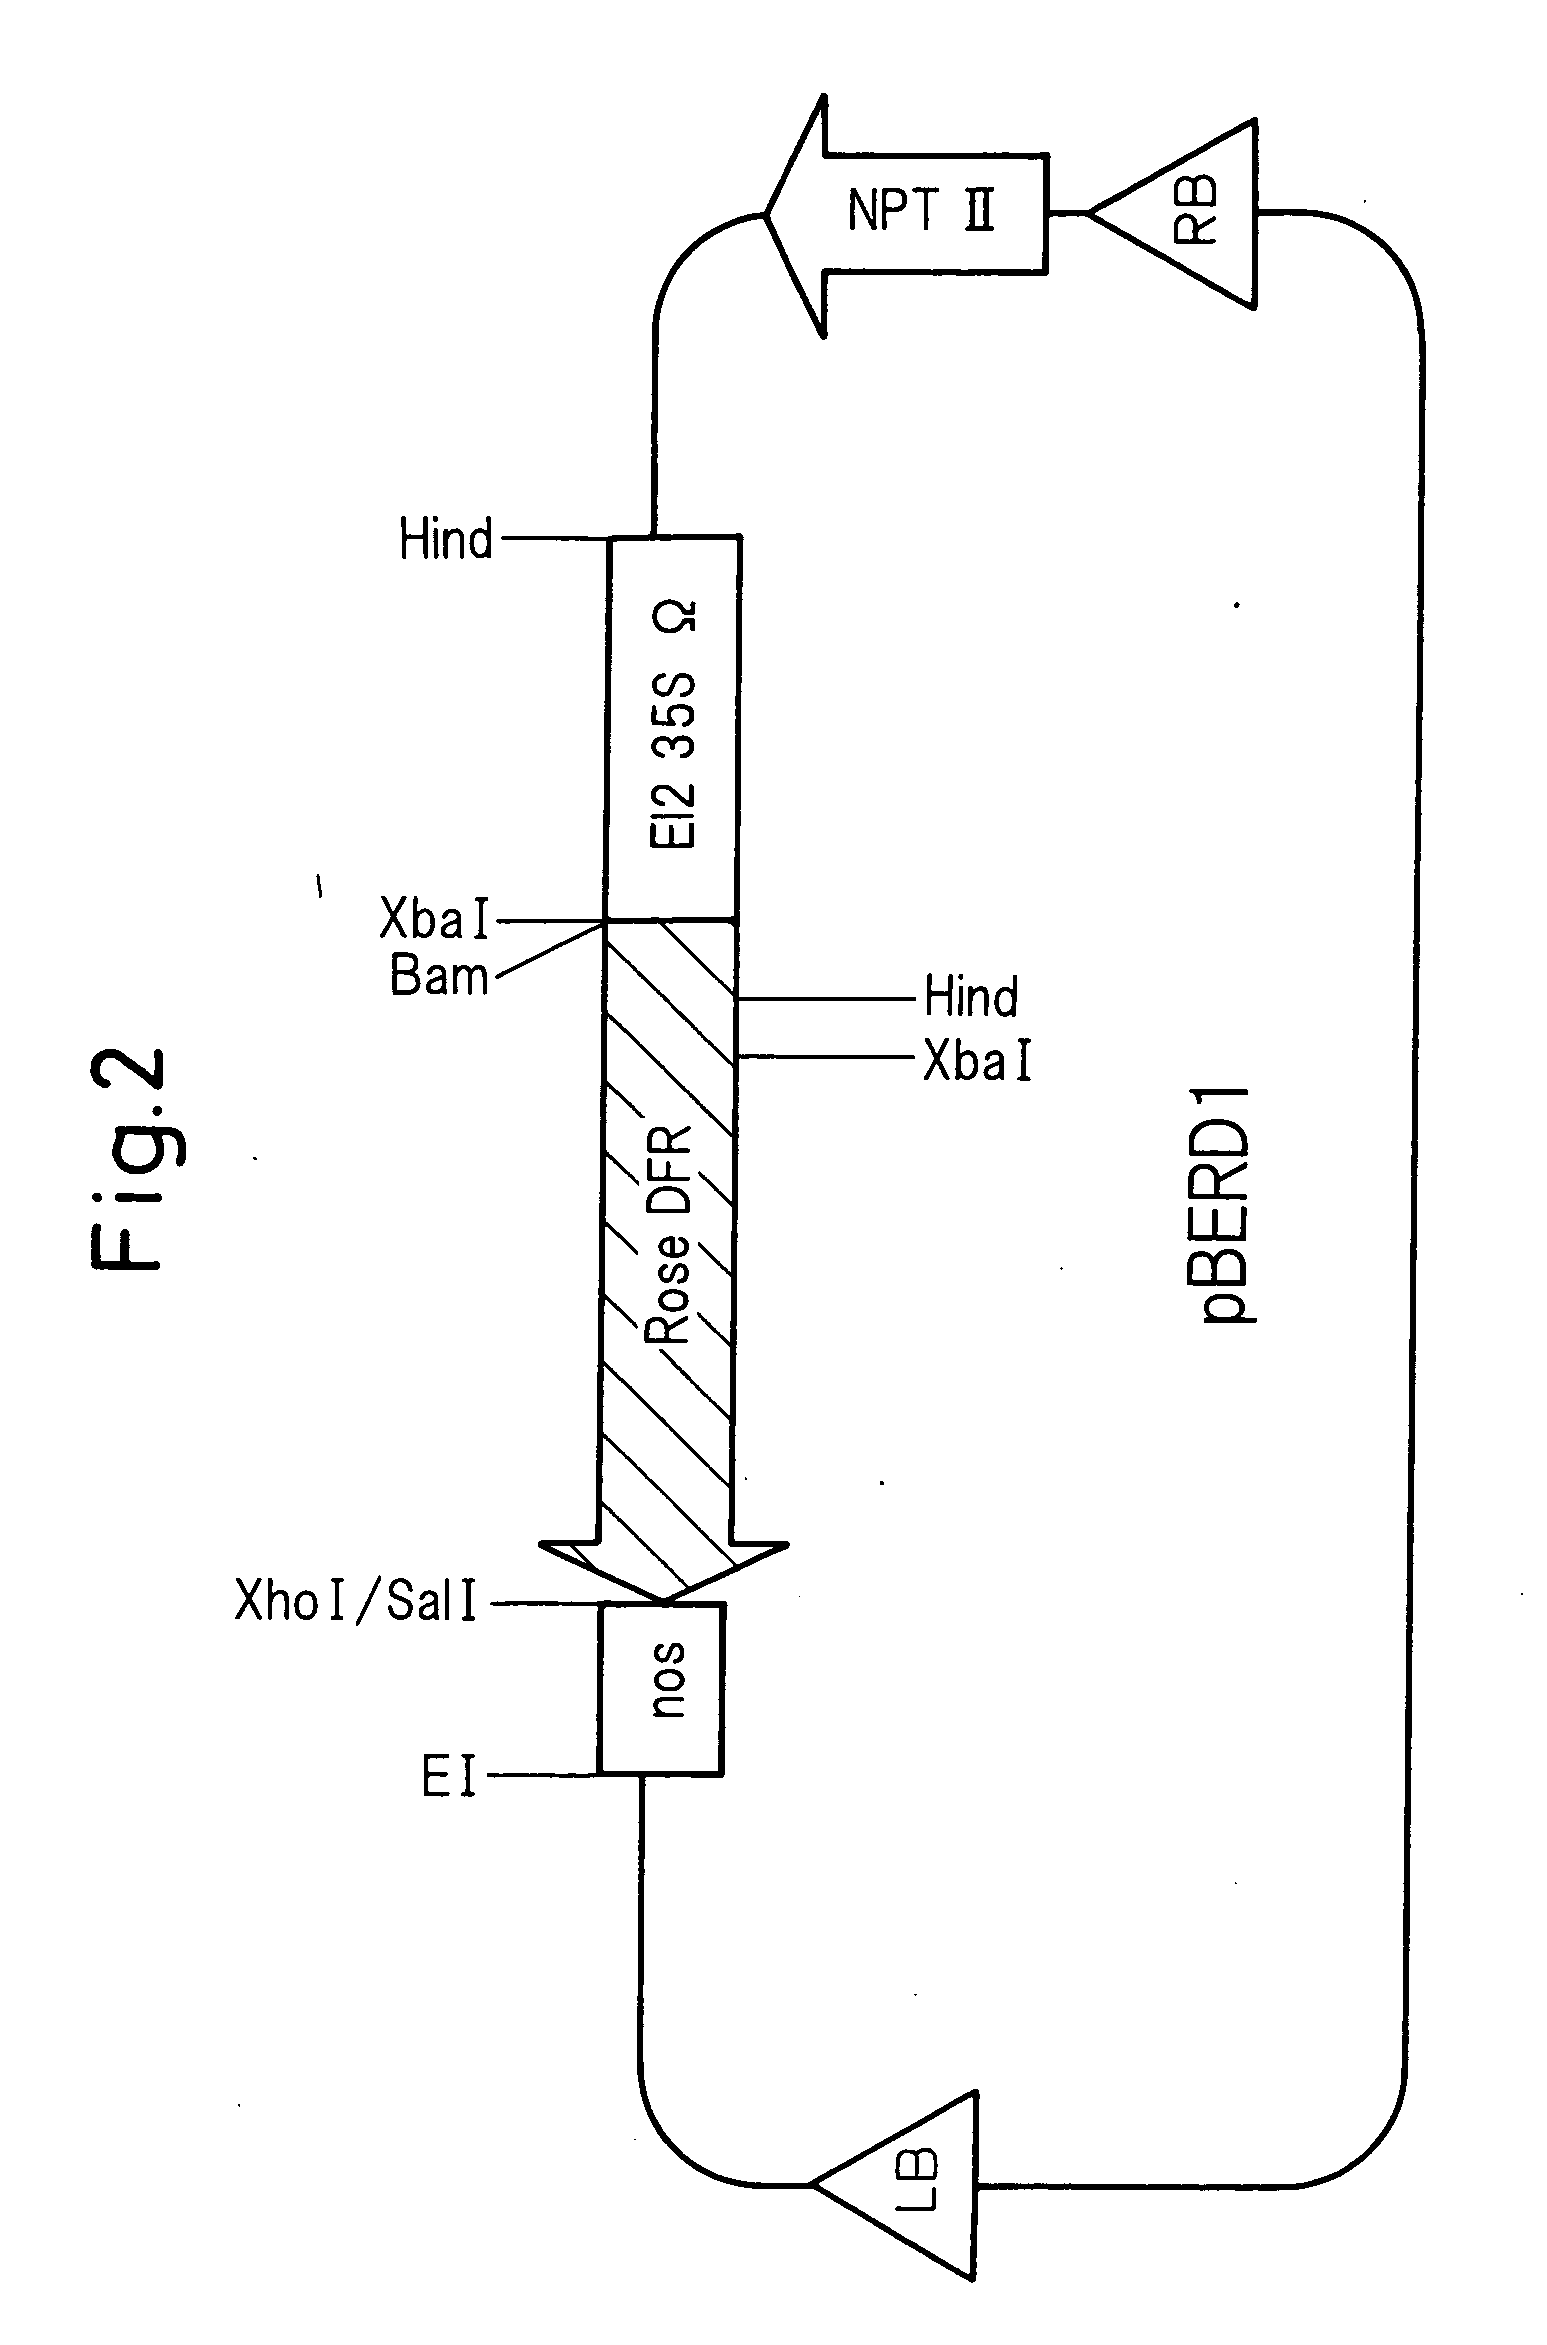 Method for producing rose with altered petal colors